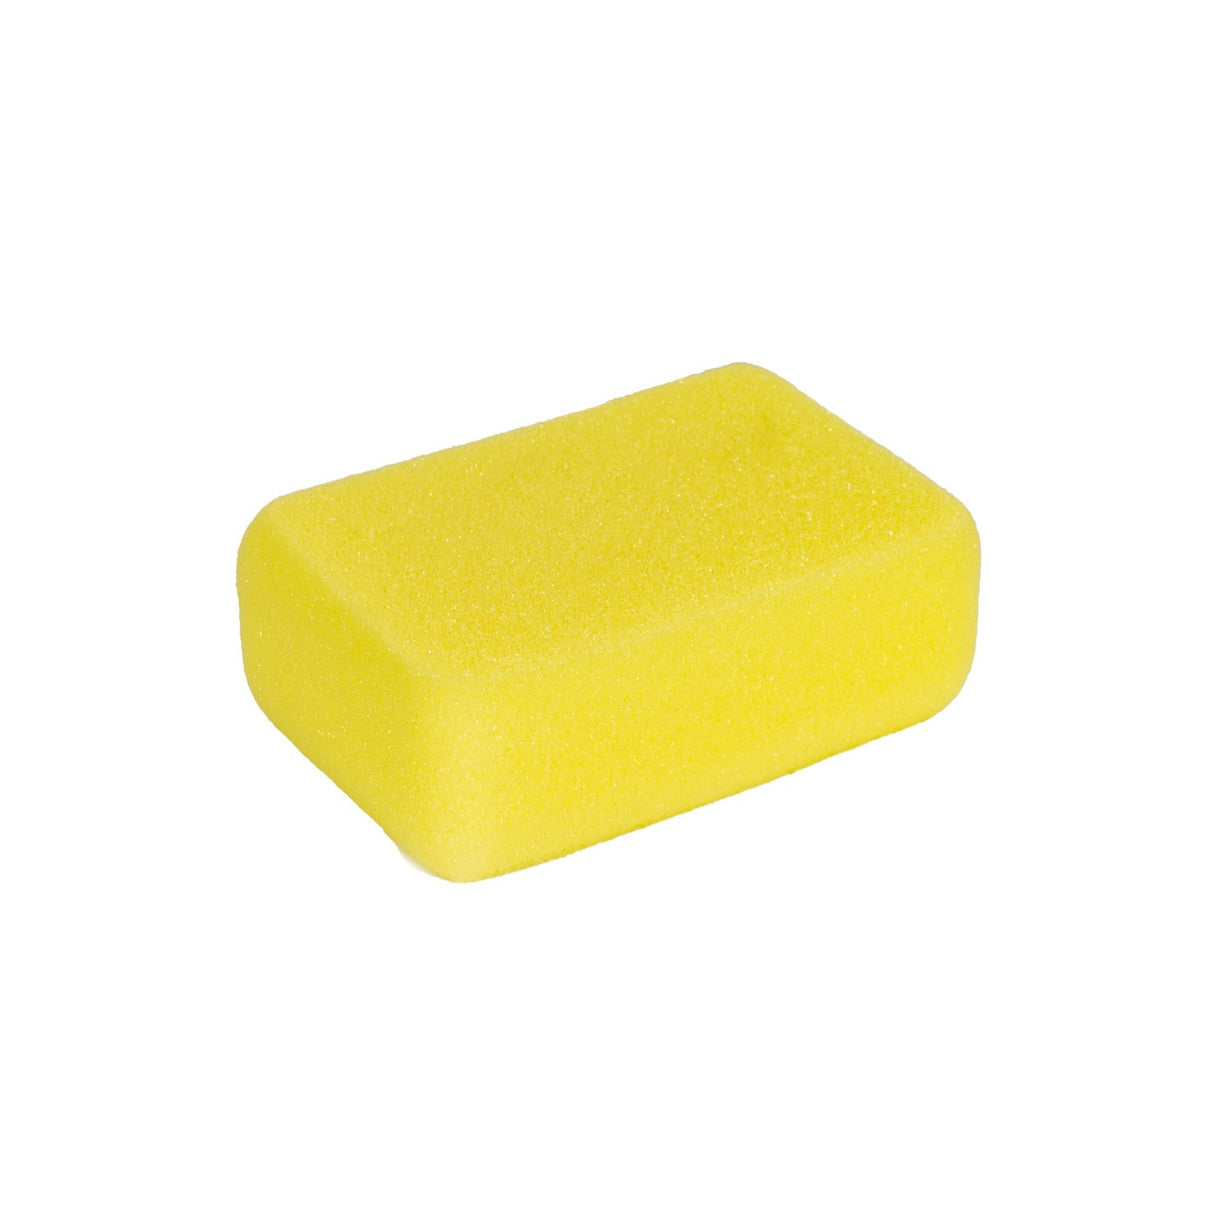 Small Synthetic Harness Sponge